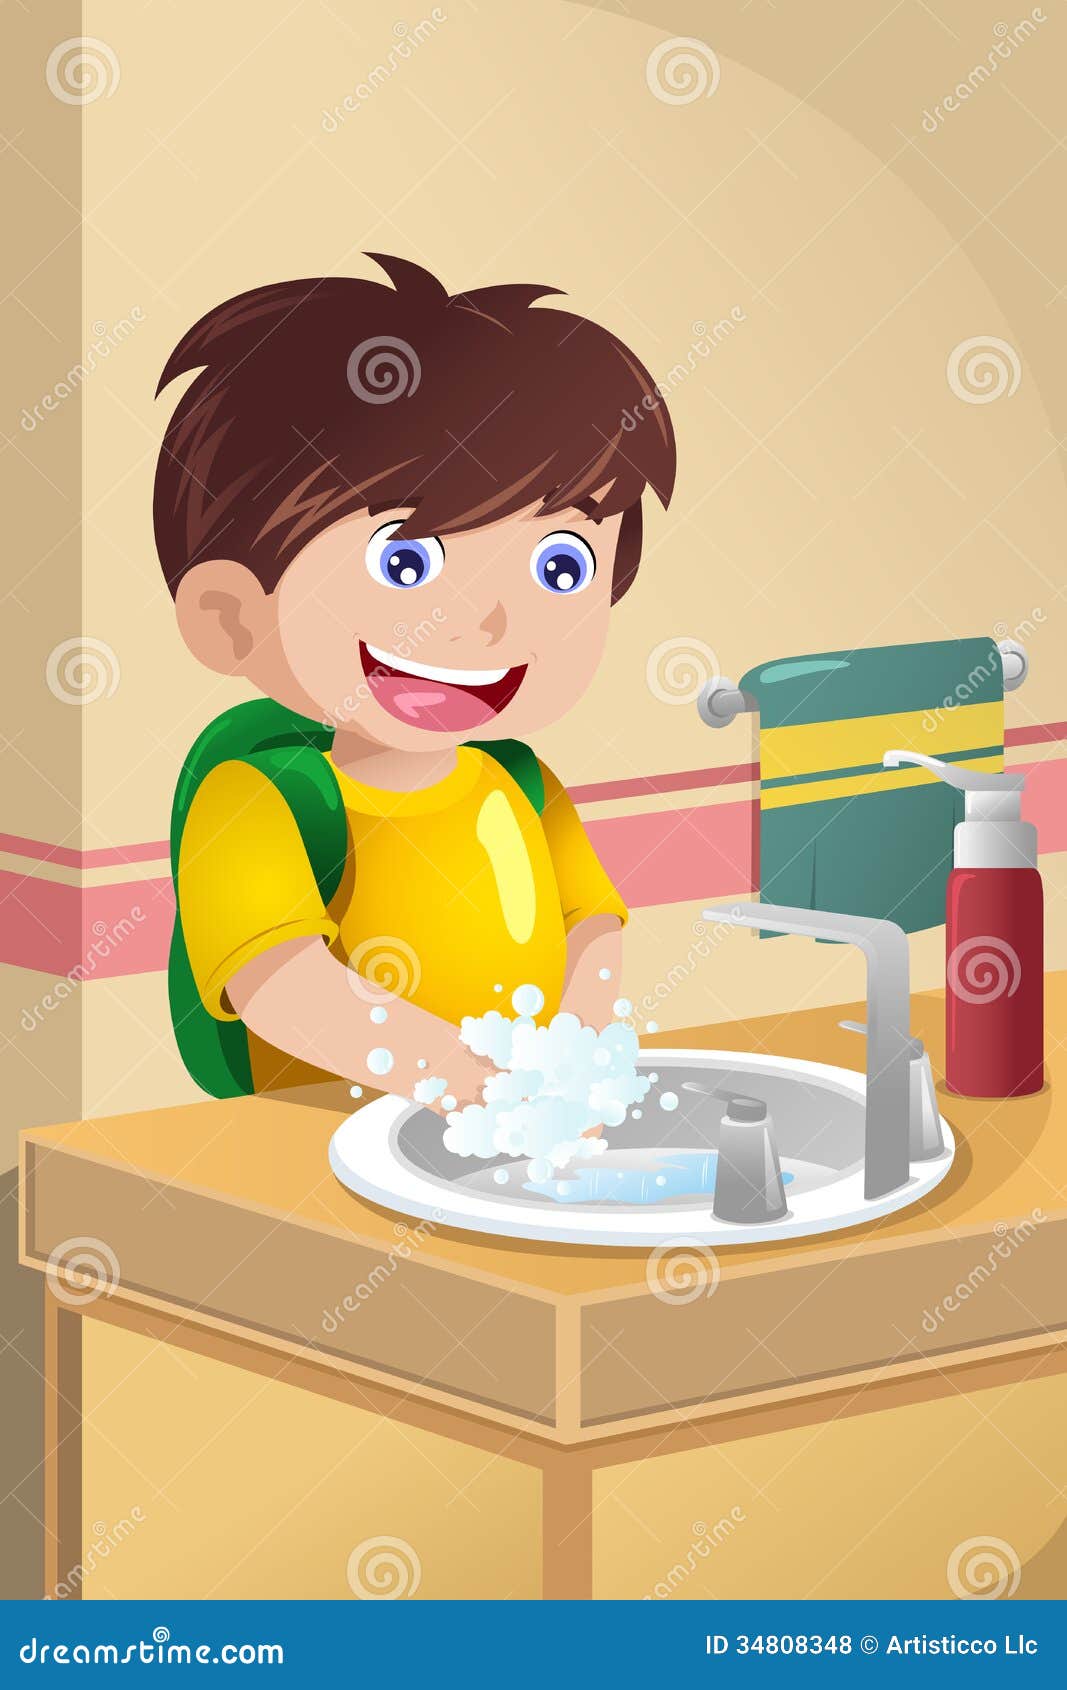 free clipart images hand washing - photo #50